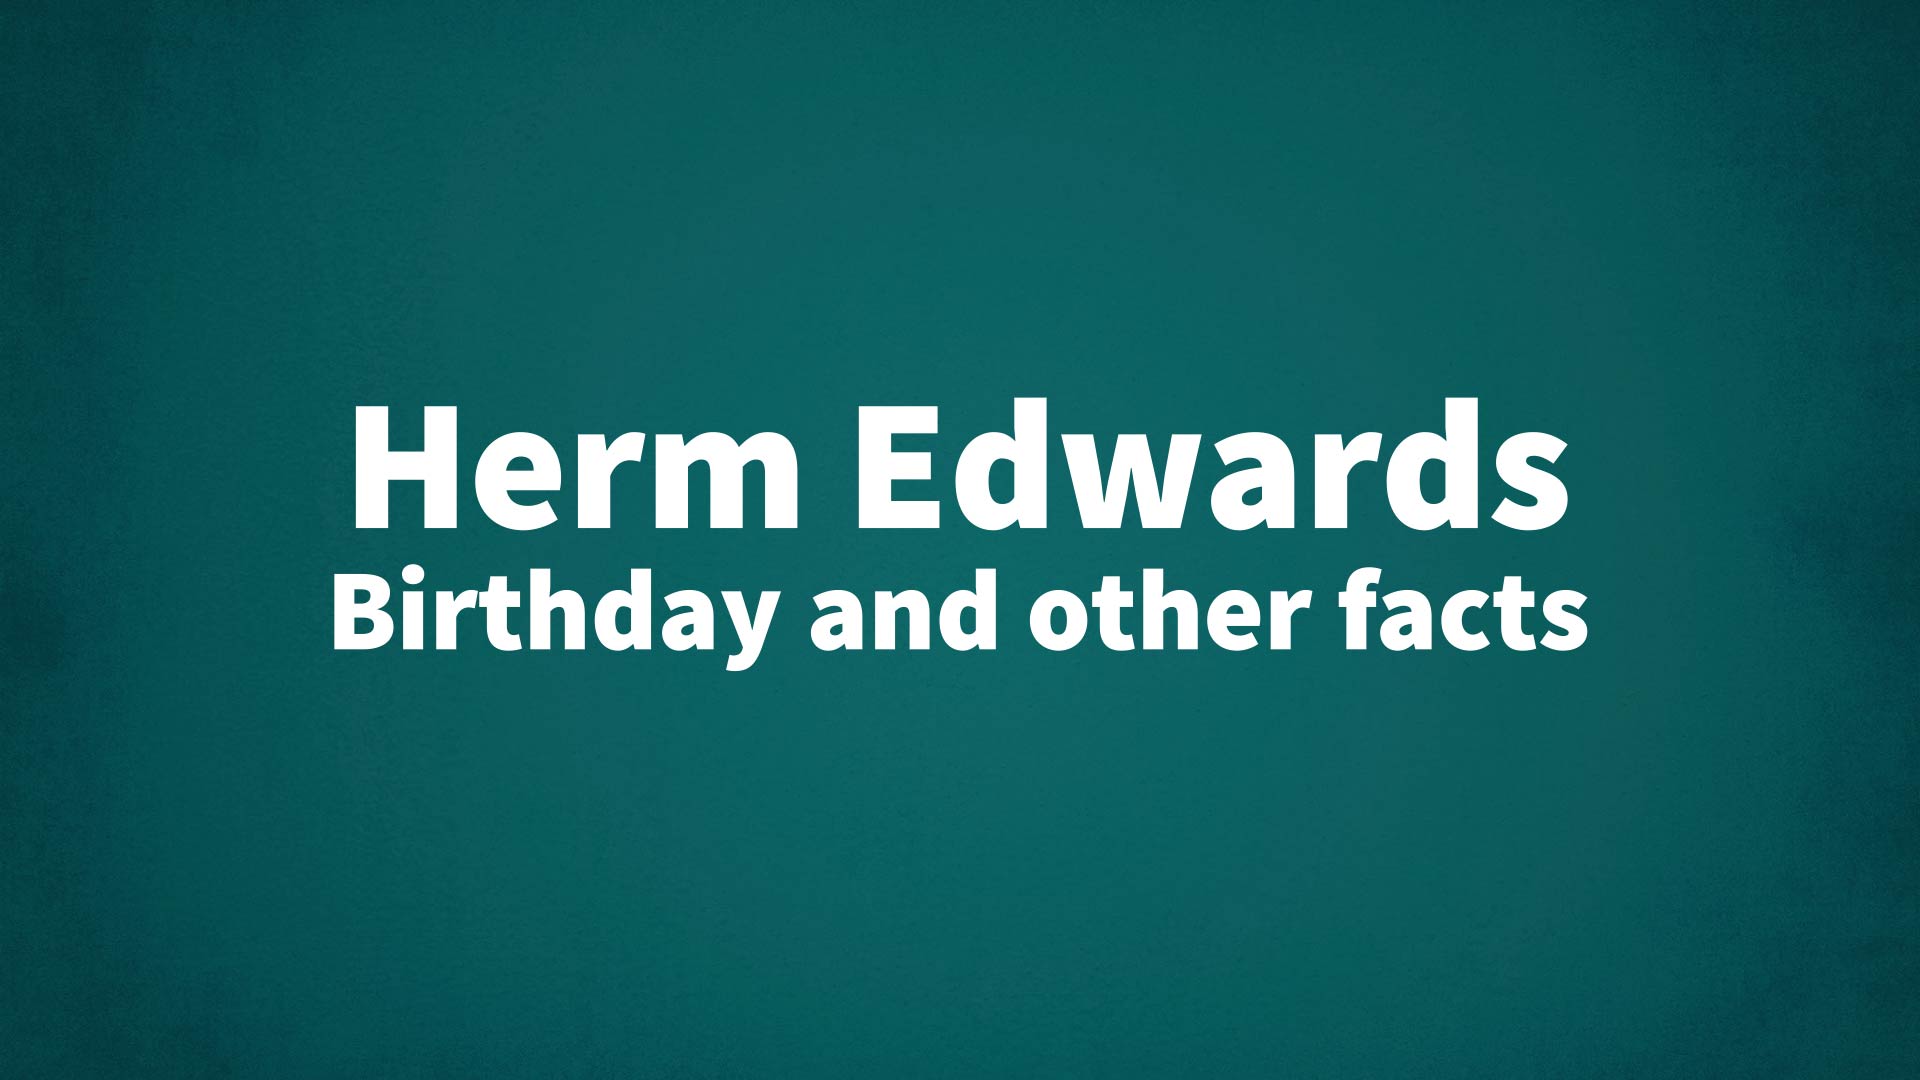 A more than happy birthday message » Stimulant